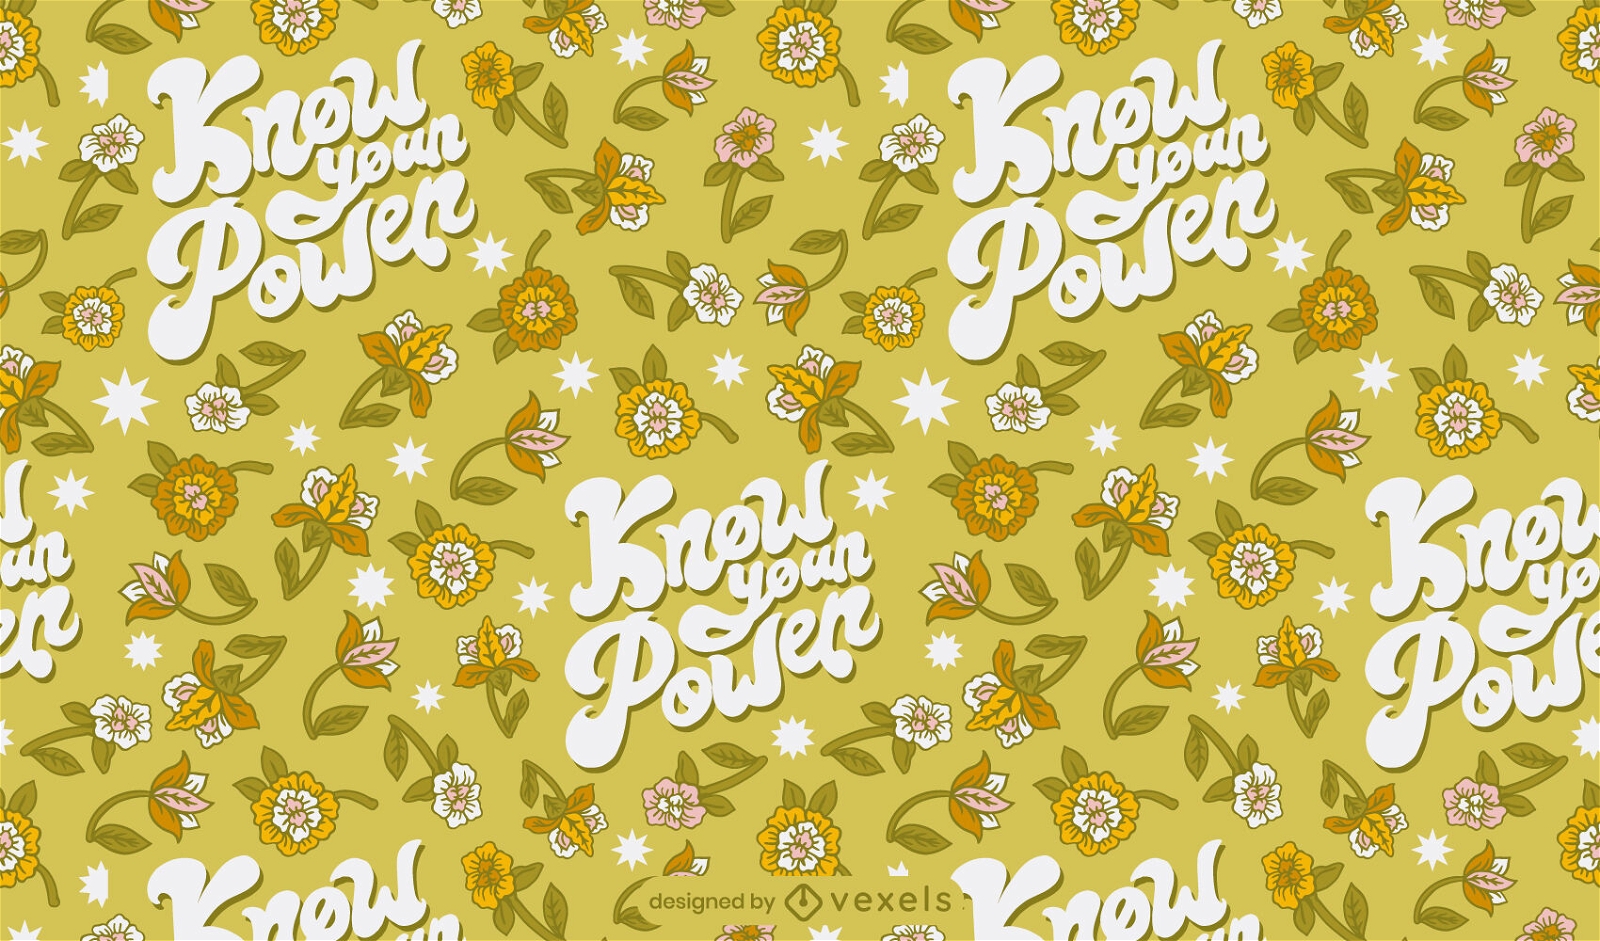 Know your power floral pattern design